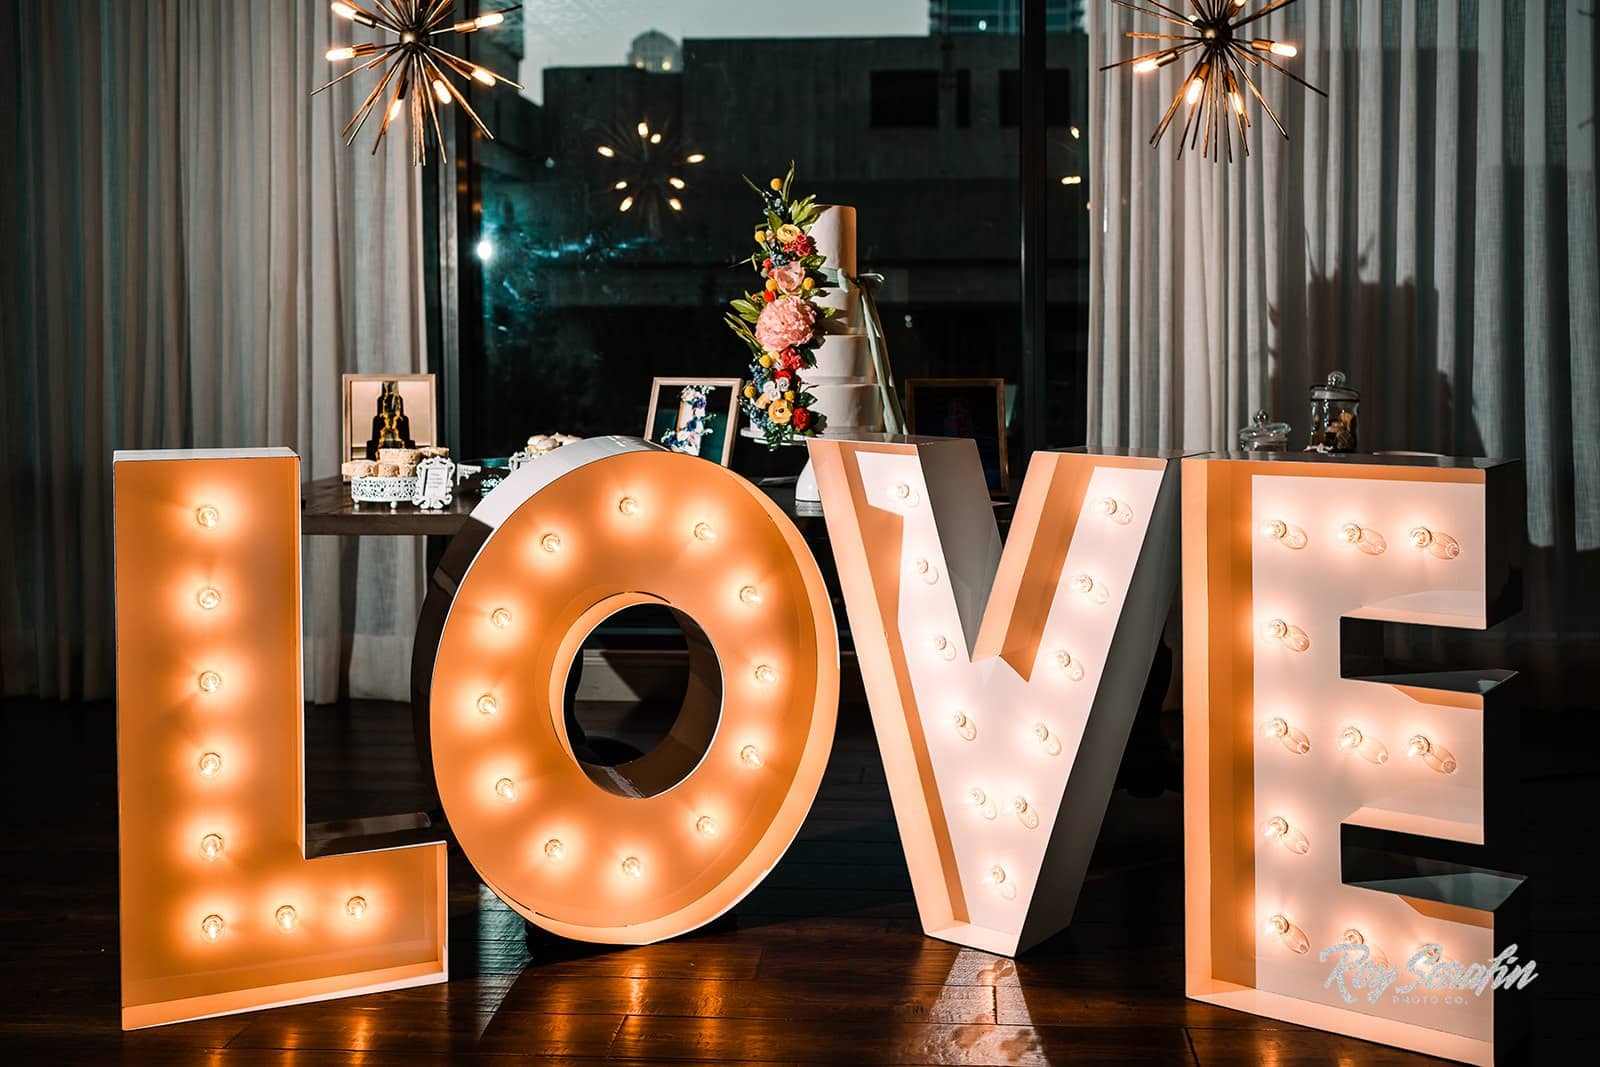 marquee letters spelling love lit up in front of table with wedding cake displayed